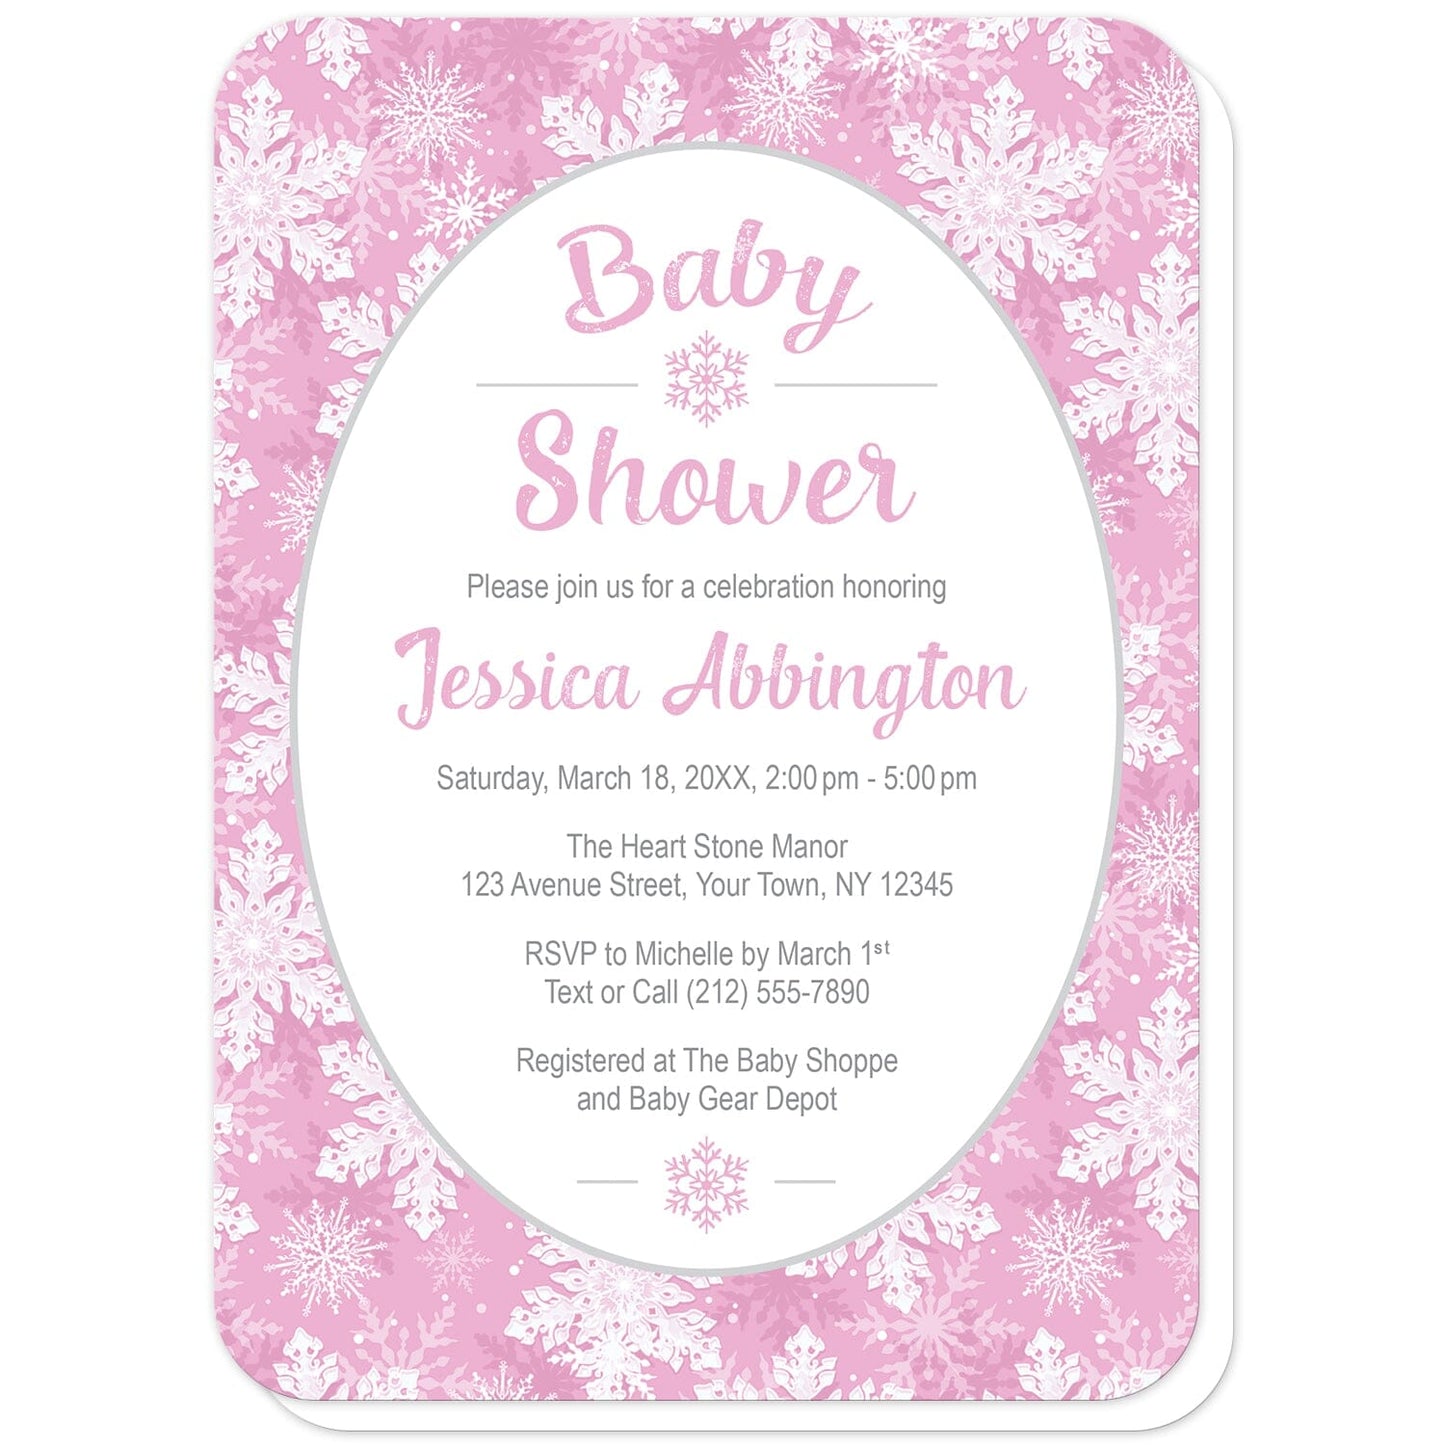 Pink Snowflake Baby Shower Invitations (with rounded corners) at Artistically Invited. Beautifully ornate pink snowflake baby shower invitations with your personalized baby shower details custom printed in pink and gray in a white oval frame design over a pink and white snowflake pattern background.